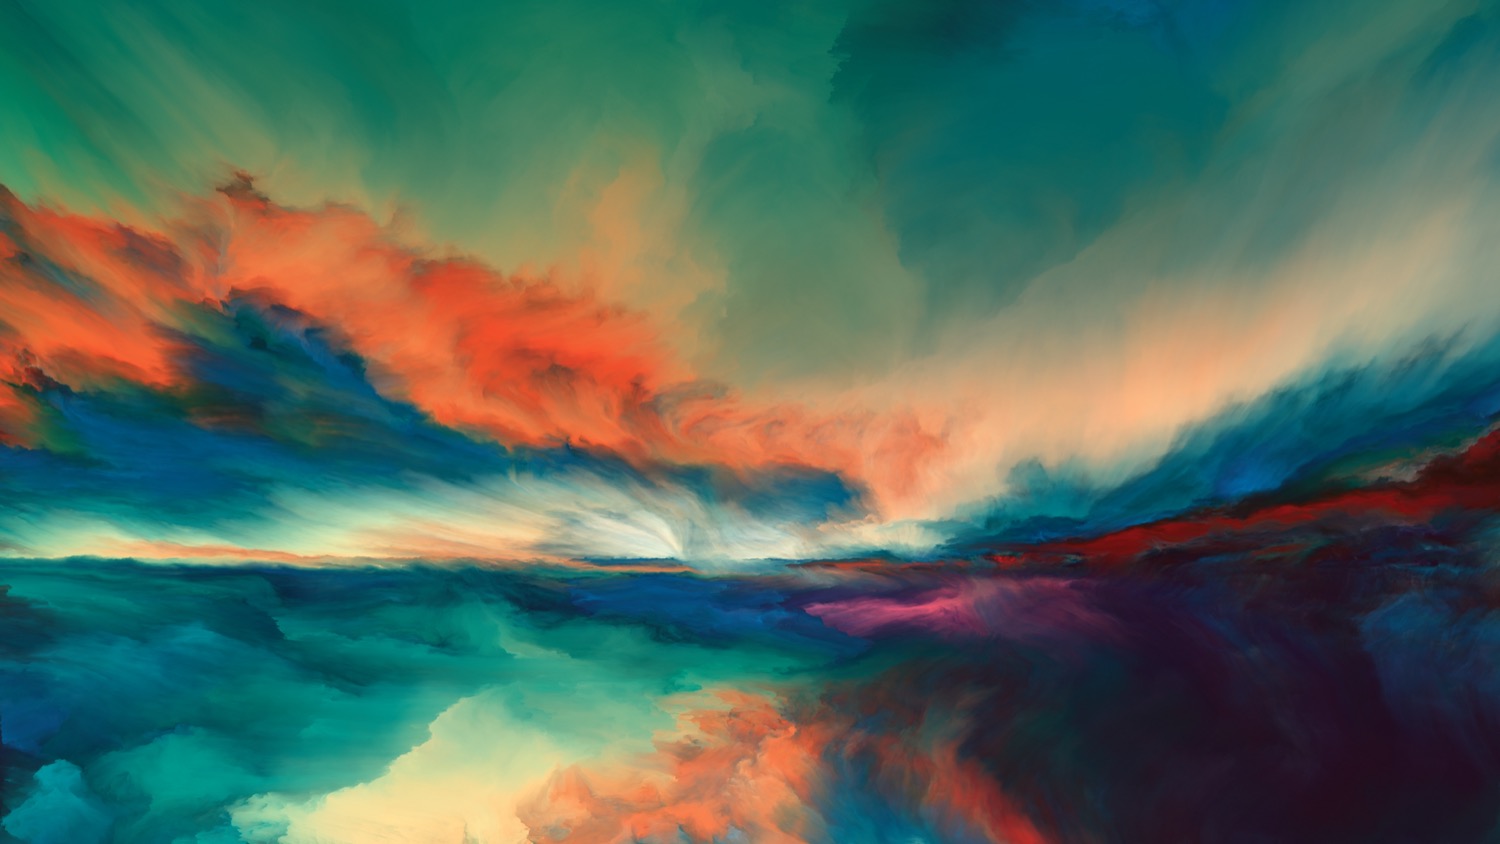 an abstract watercolor painting of a sun setting over a lake. clouds glow orange in front of a muted turqoise glow in the sky